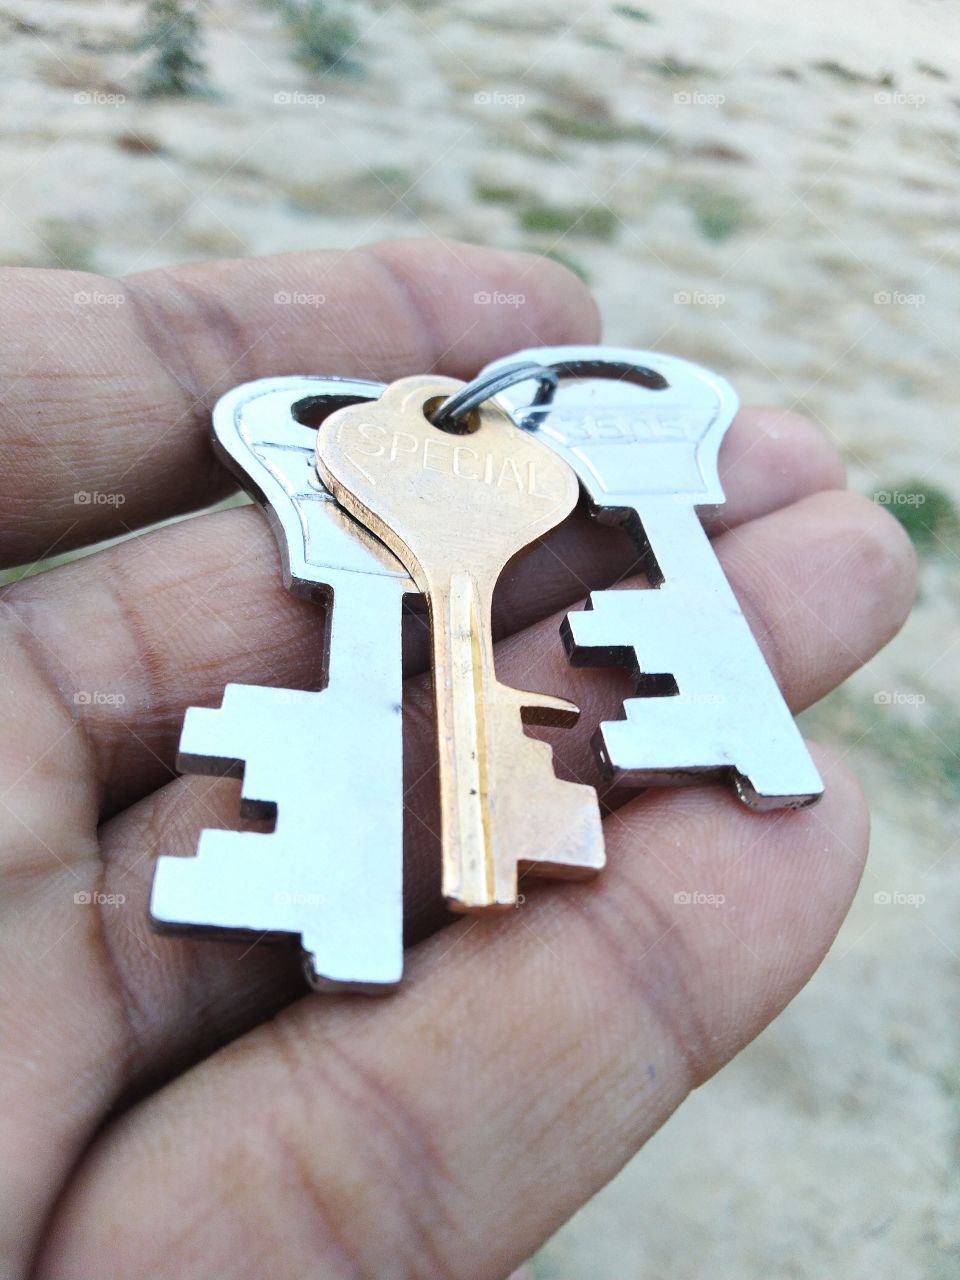 metal keys for security for homes lockers